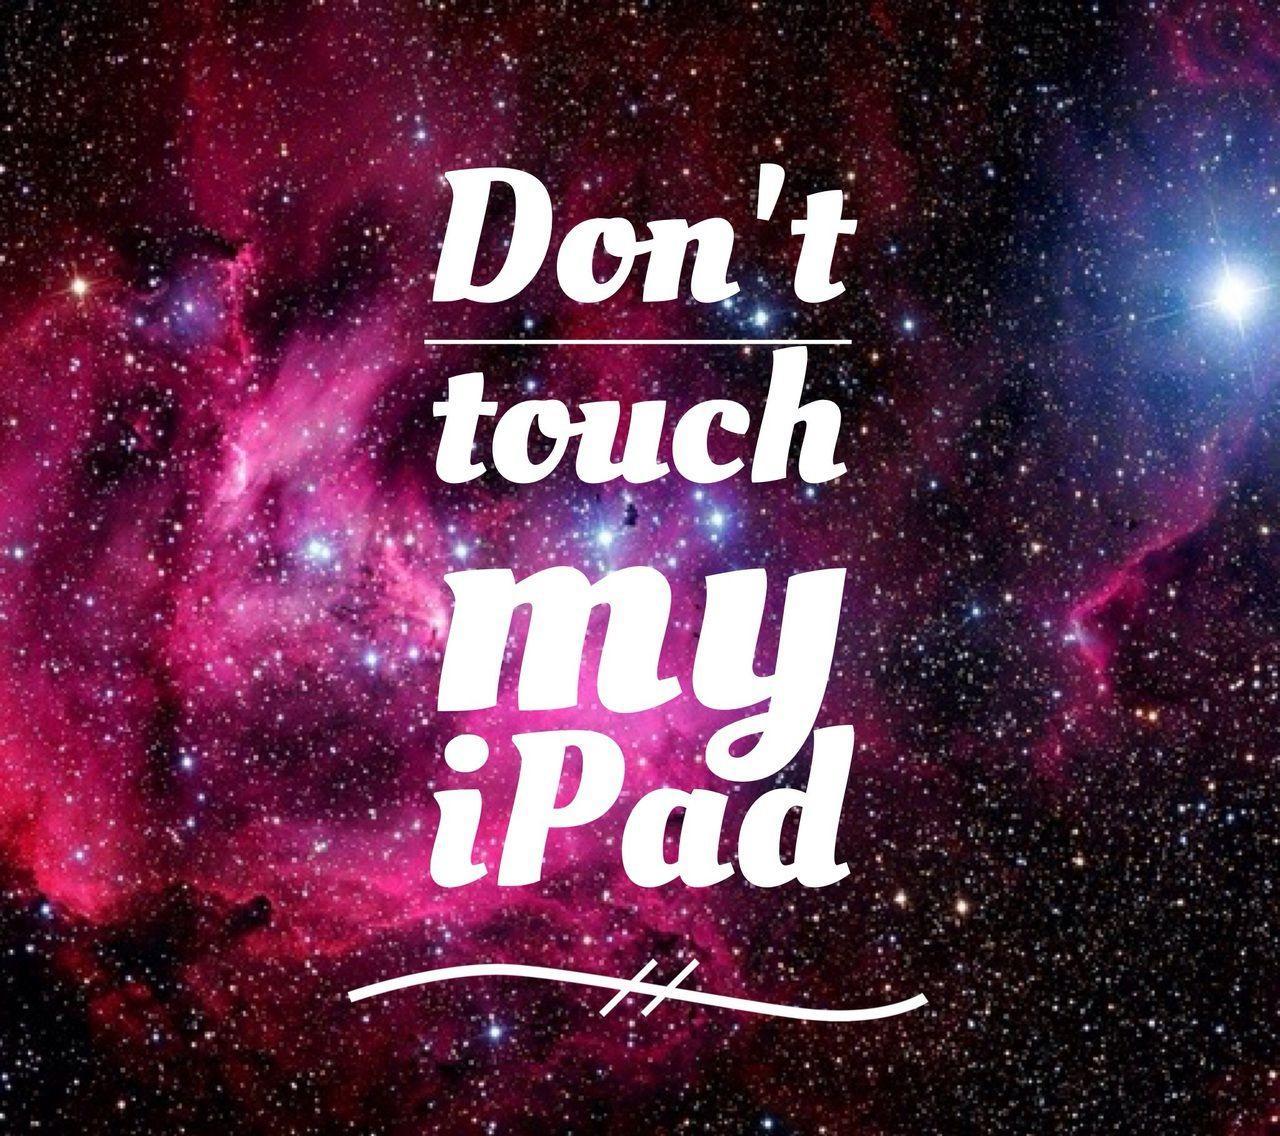 25 Dont touch my phone wallpapers ideas  dont touch my phone wallpapers dont  touch me funny phone wallpaper